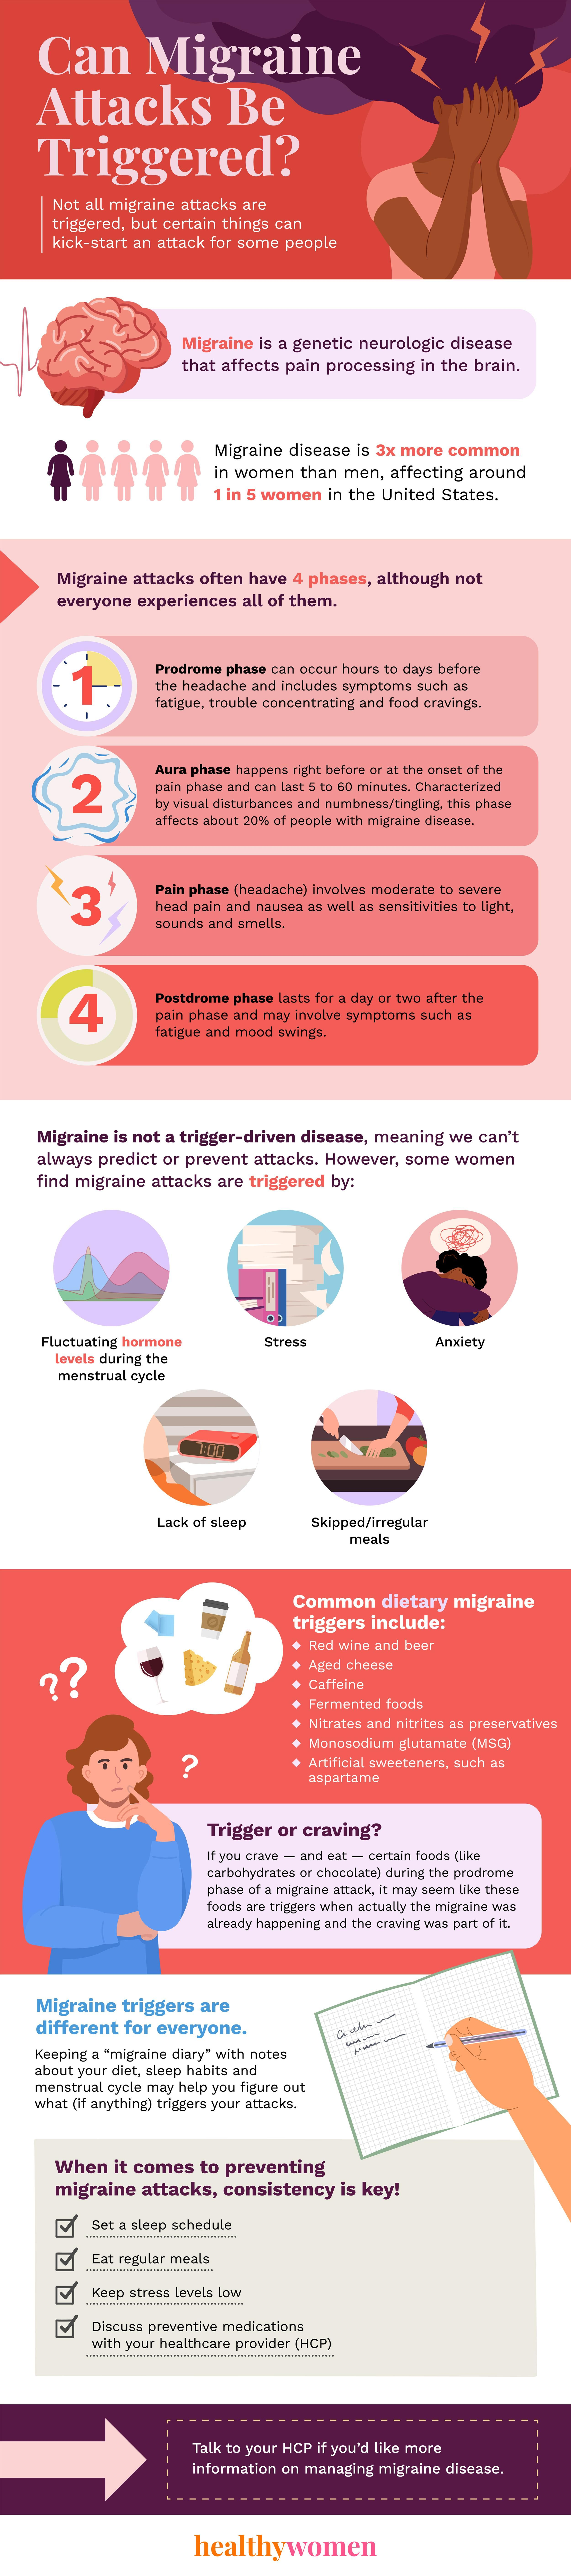 Can Migraine Attacks Be Triggered? - HealthyWomen